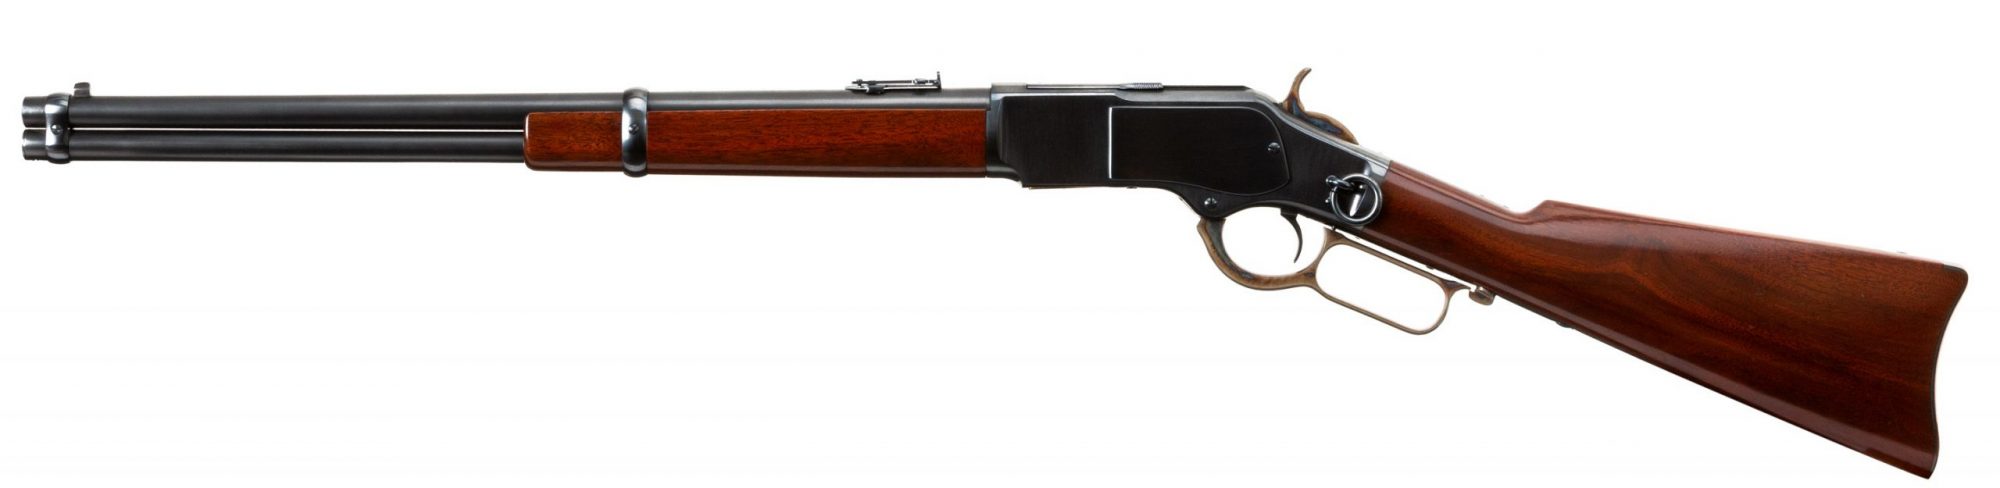 Photo of a Winchester Model 1873 from 1889, restored in 2015 and for sale by Turnbull Restoration